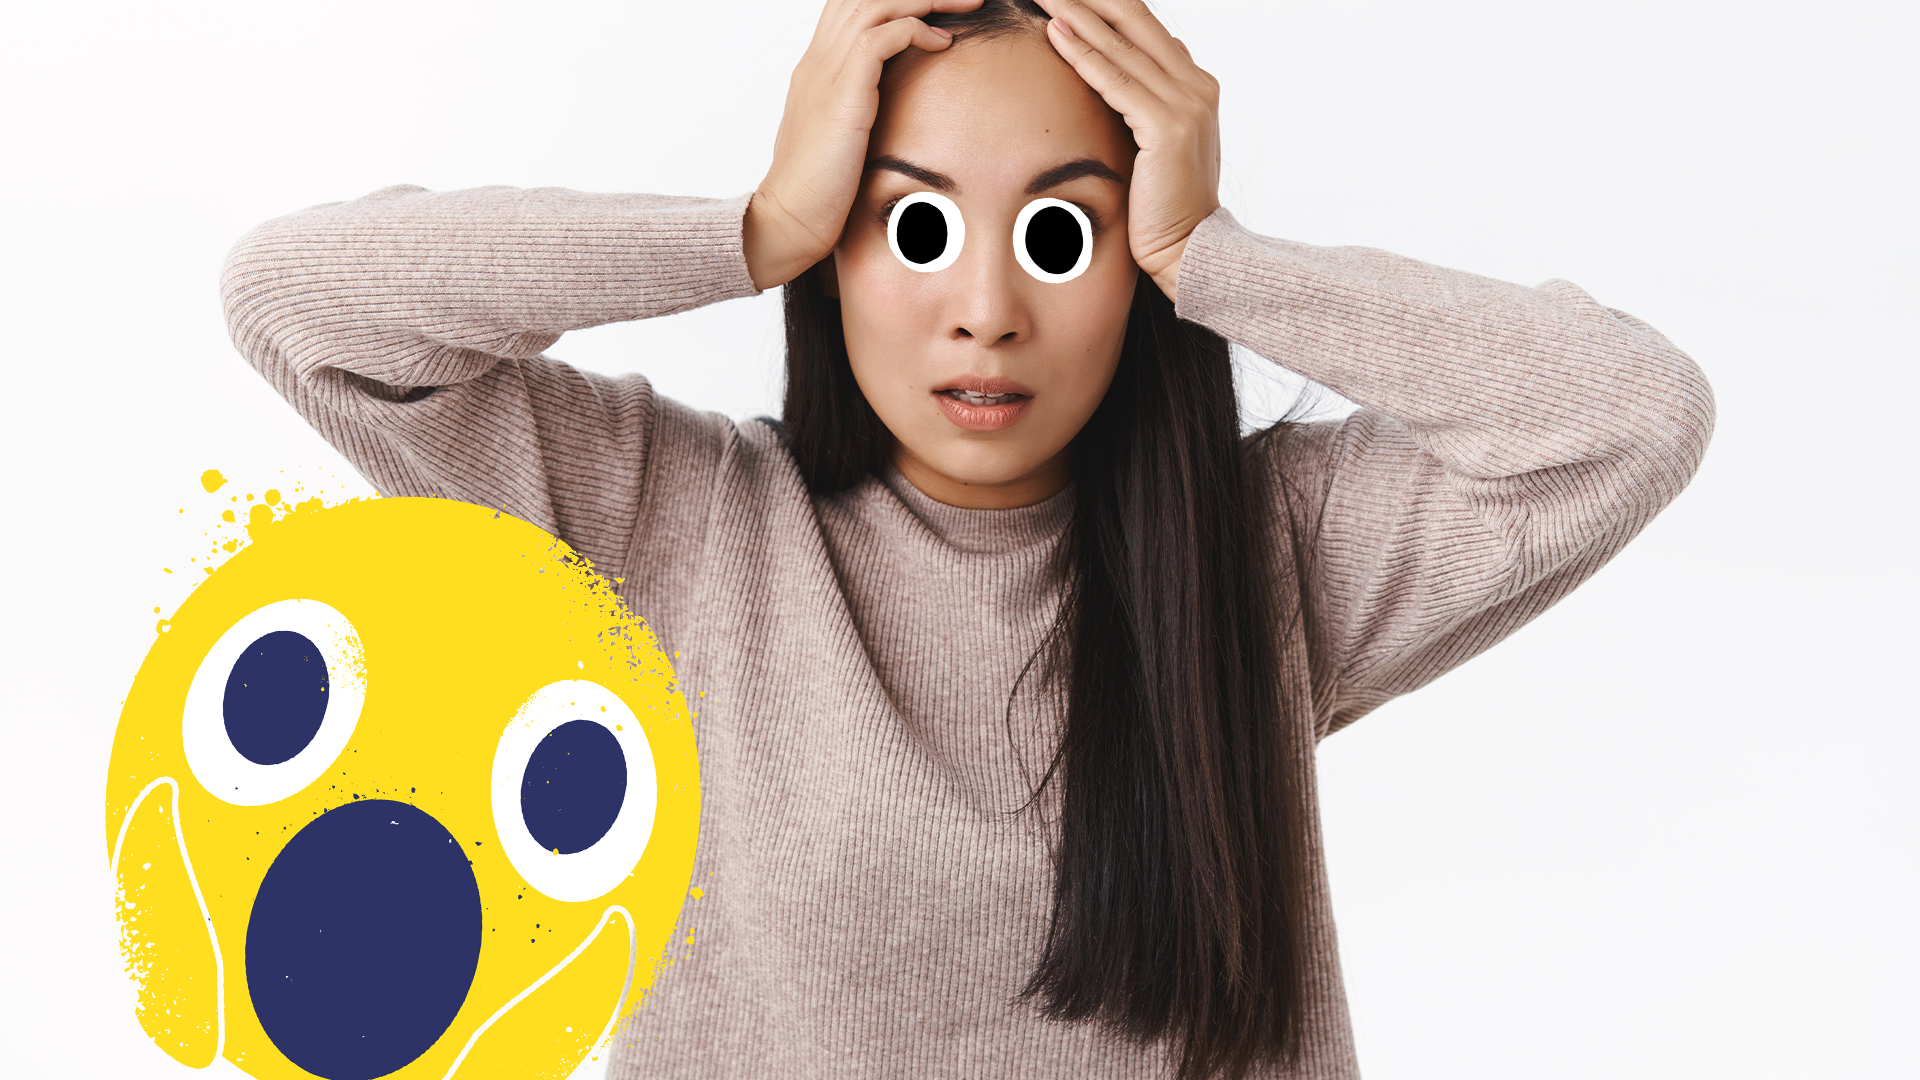 Panicked woman on white background with shocked emoji